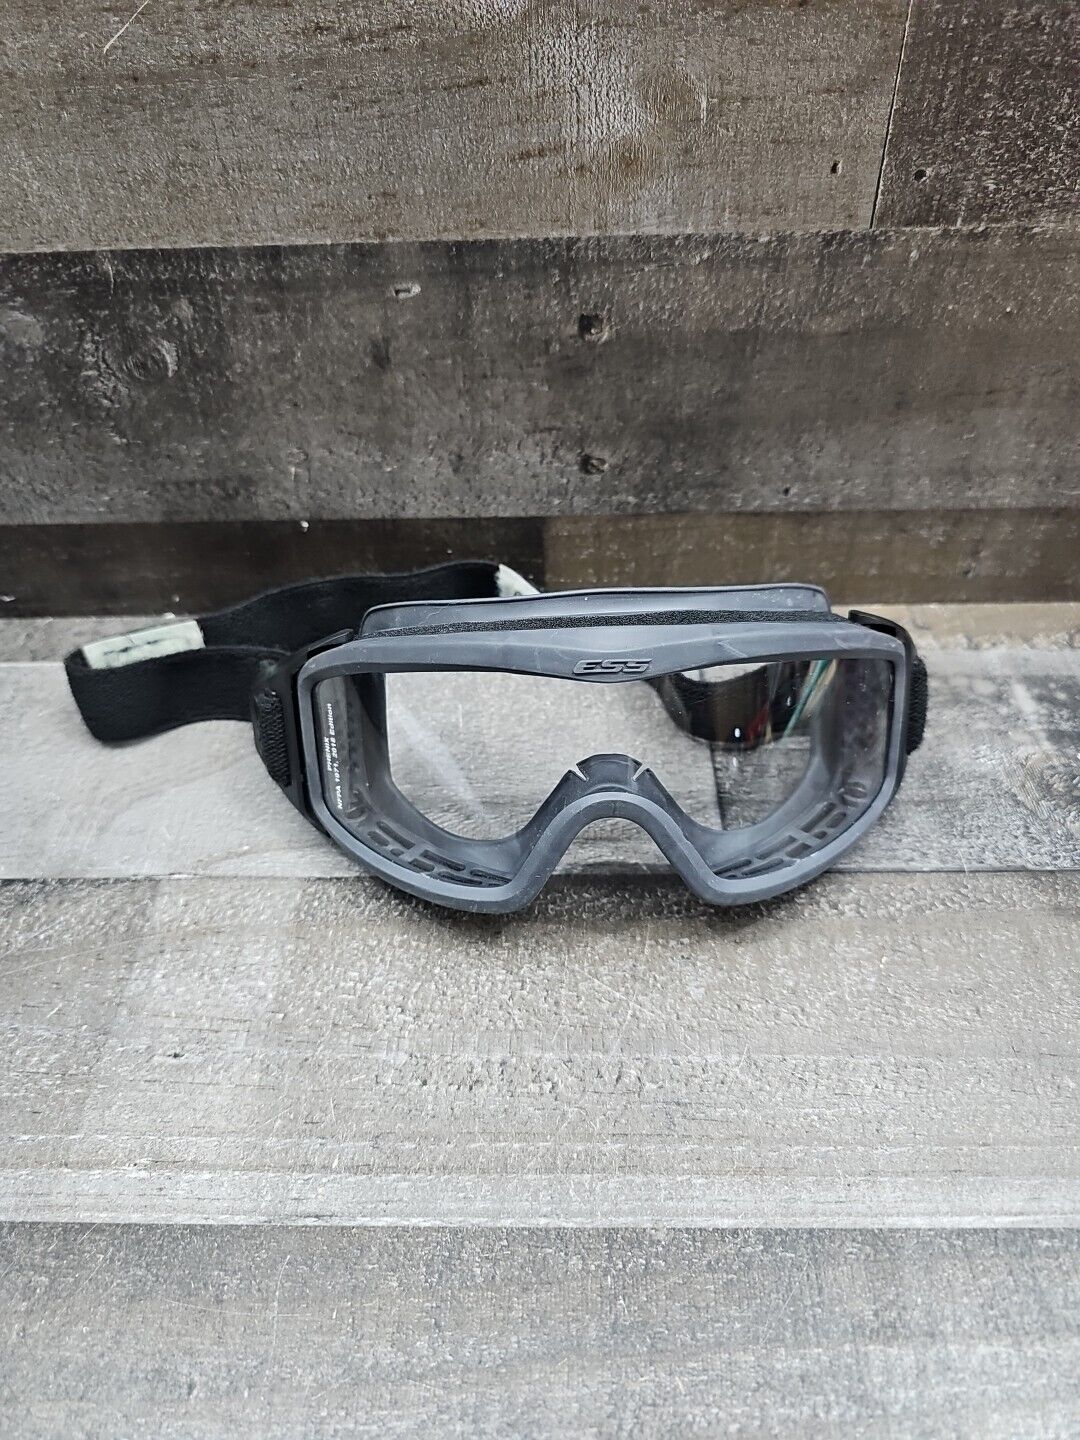 ESS Military Style Goggles Phenix NFPA Approved Clear Lenses Gray W Black Strap